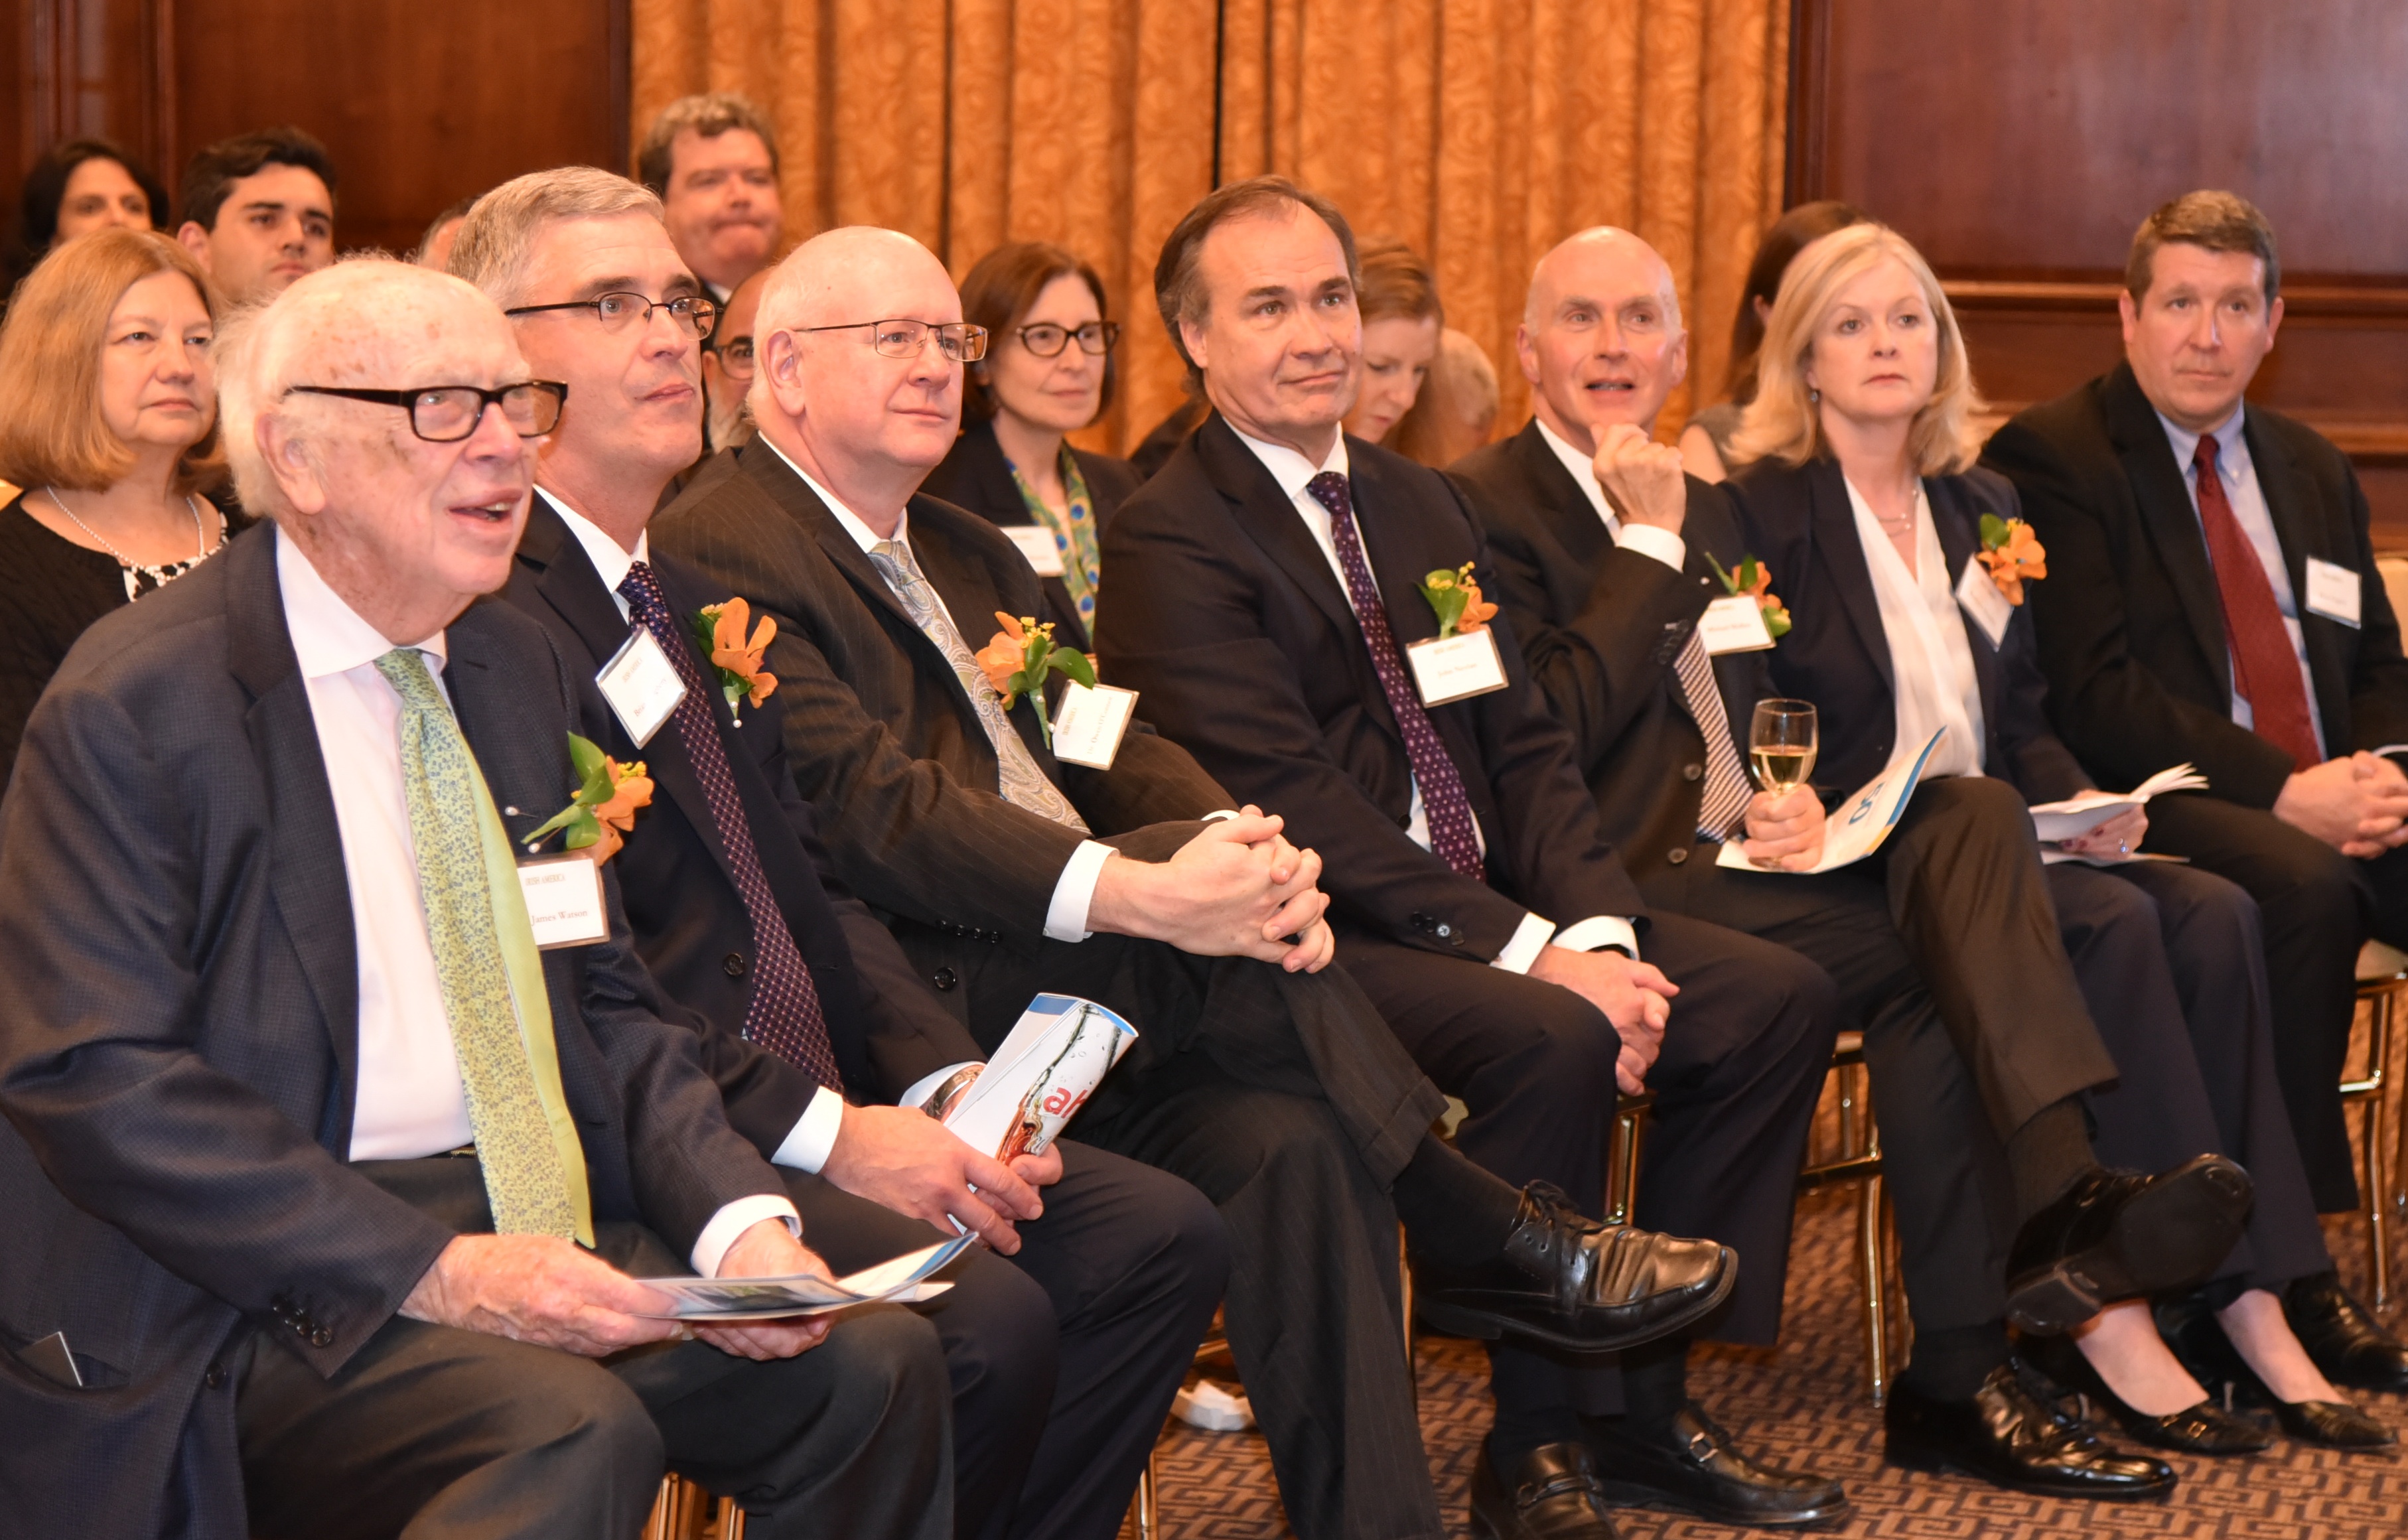 Honorees Dr. James Watson, Brian Dougherty, Dr. Owen O'Connor, Dr. John Neylan III, Dr. Michael Mullen, and Keynote Speaker Dr. Barbara Murphy and her husband, Peter Fogarty. (Photo Nuala Purcell)